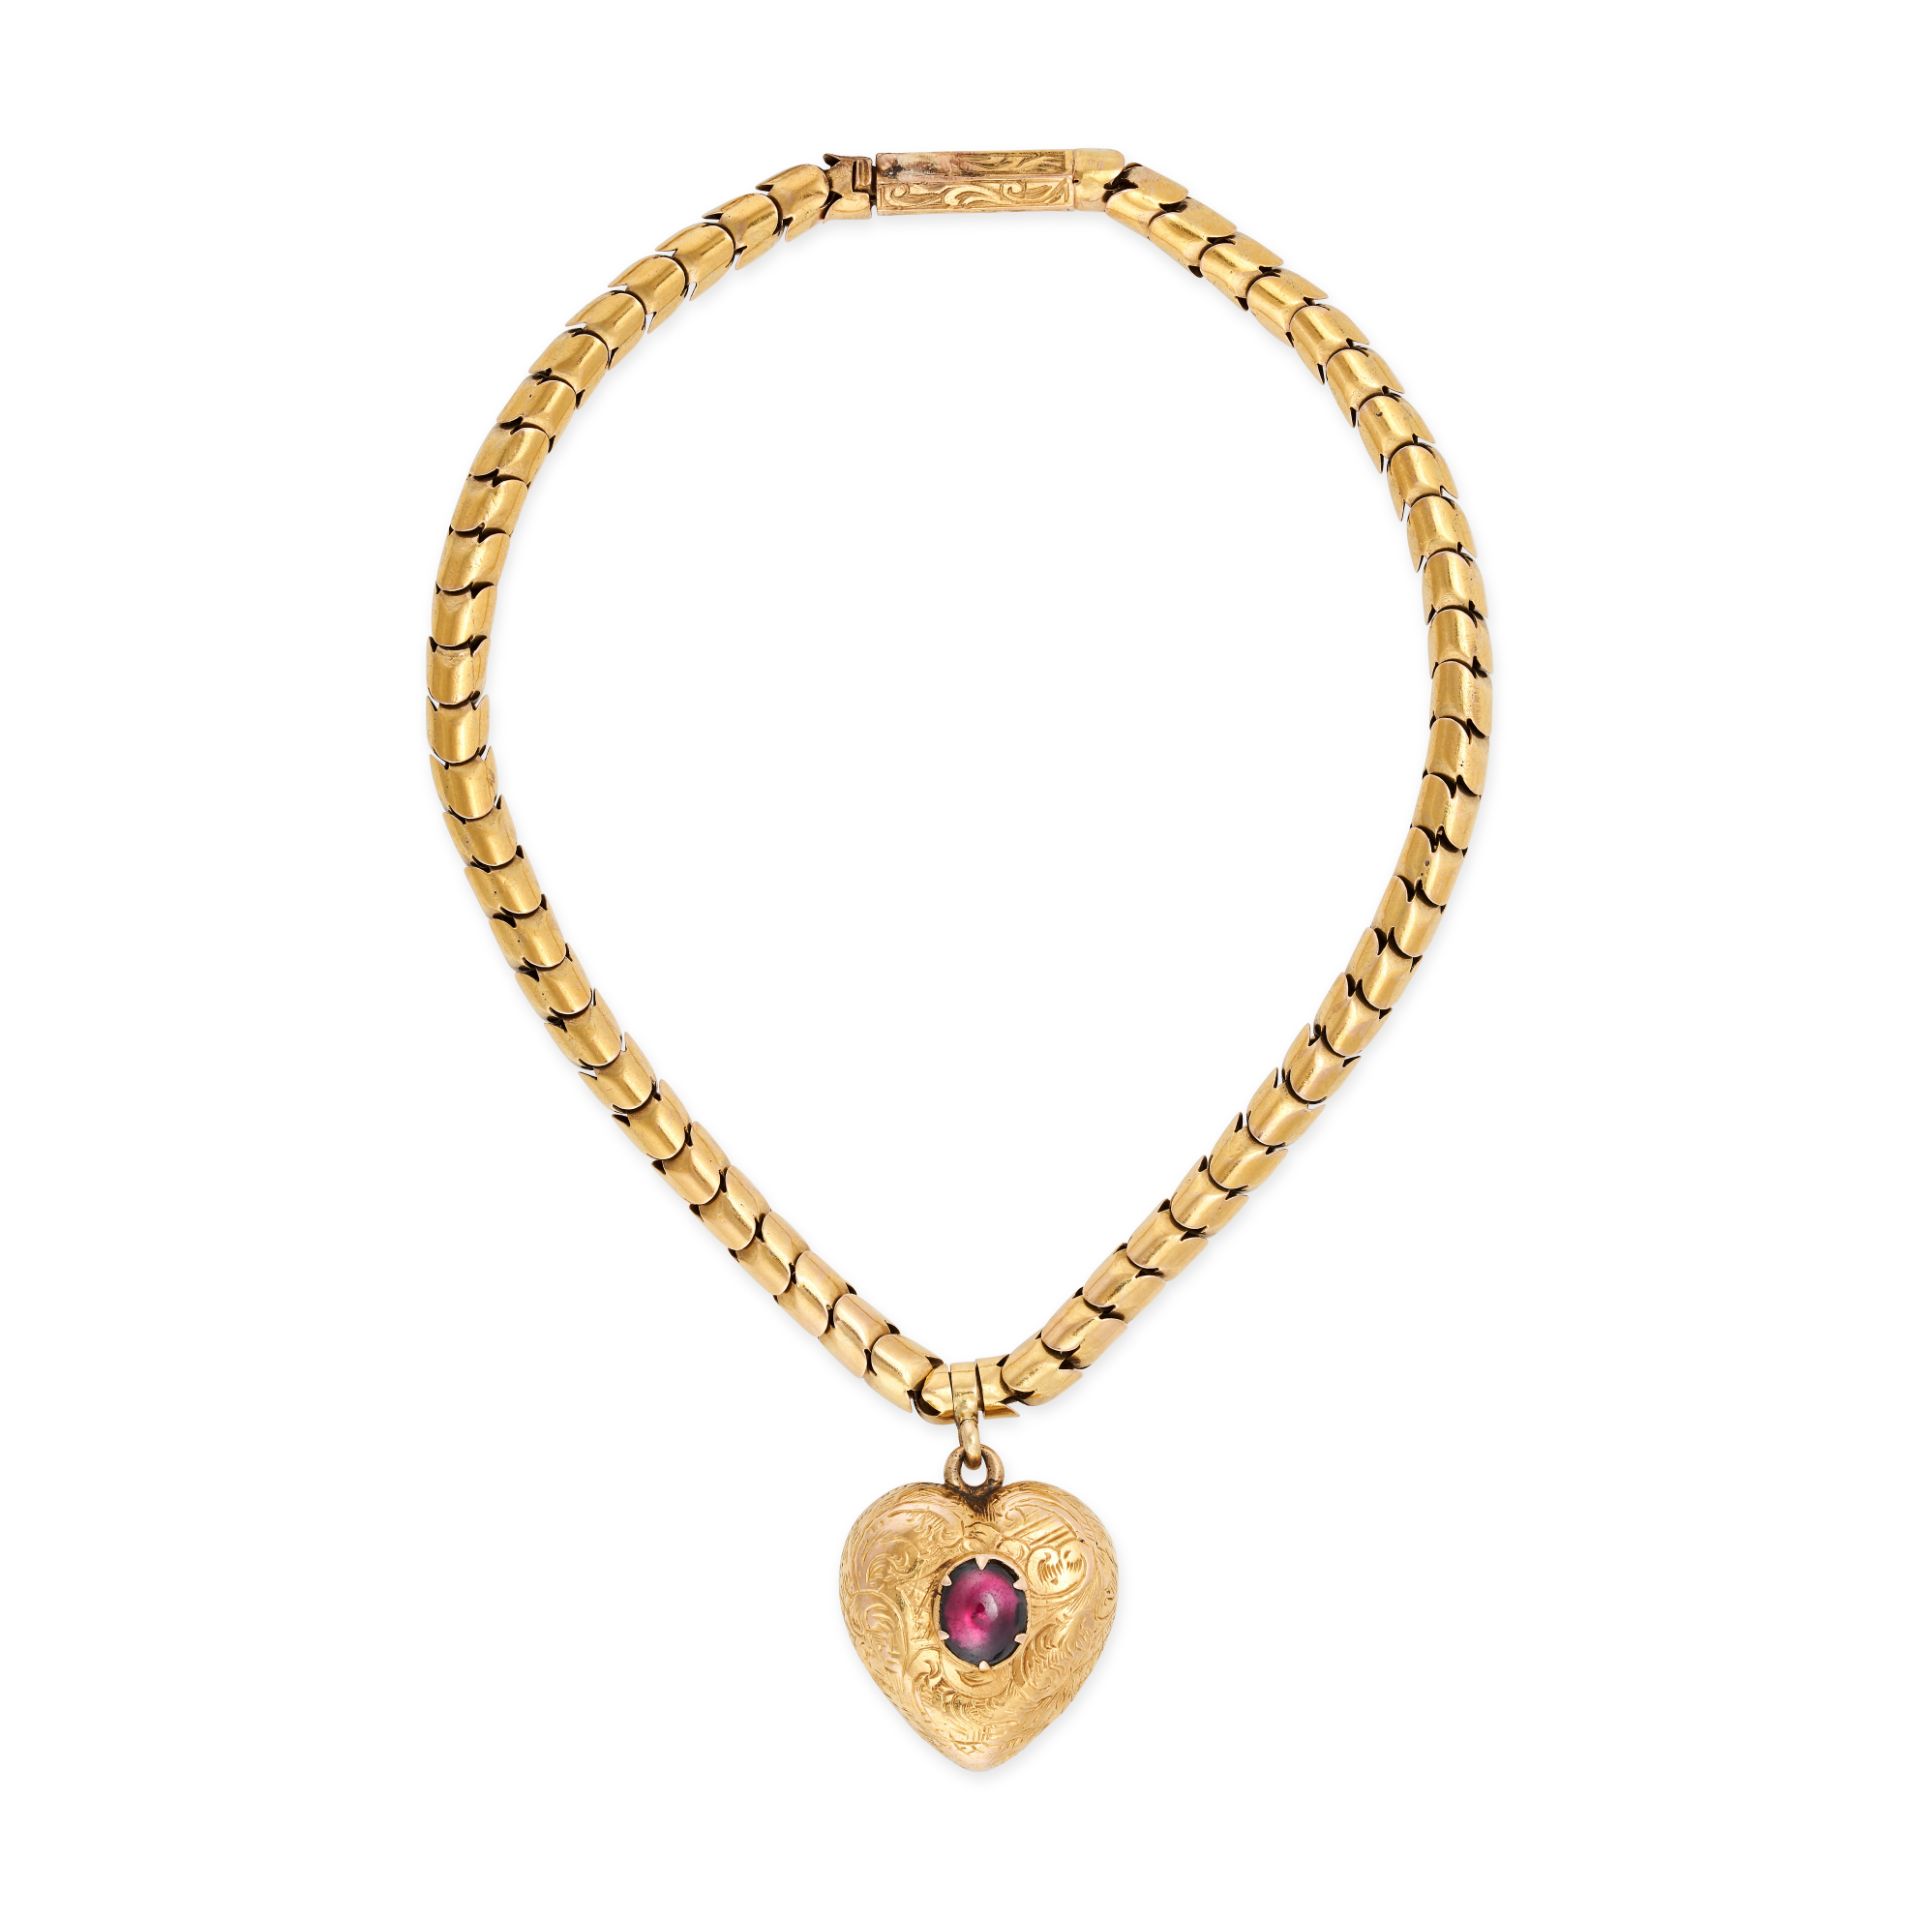 AN ANTIQUE GARNET SWEETHEART CHARM BRACELET in yellow gold, comprising a row of snake links, susp...